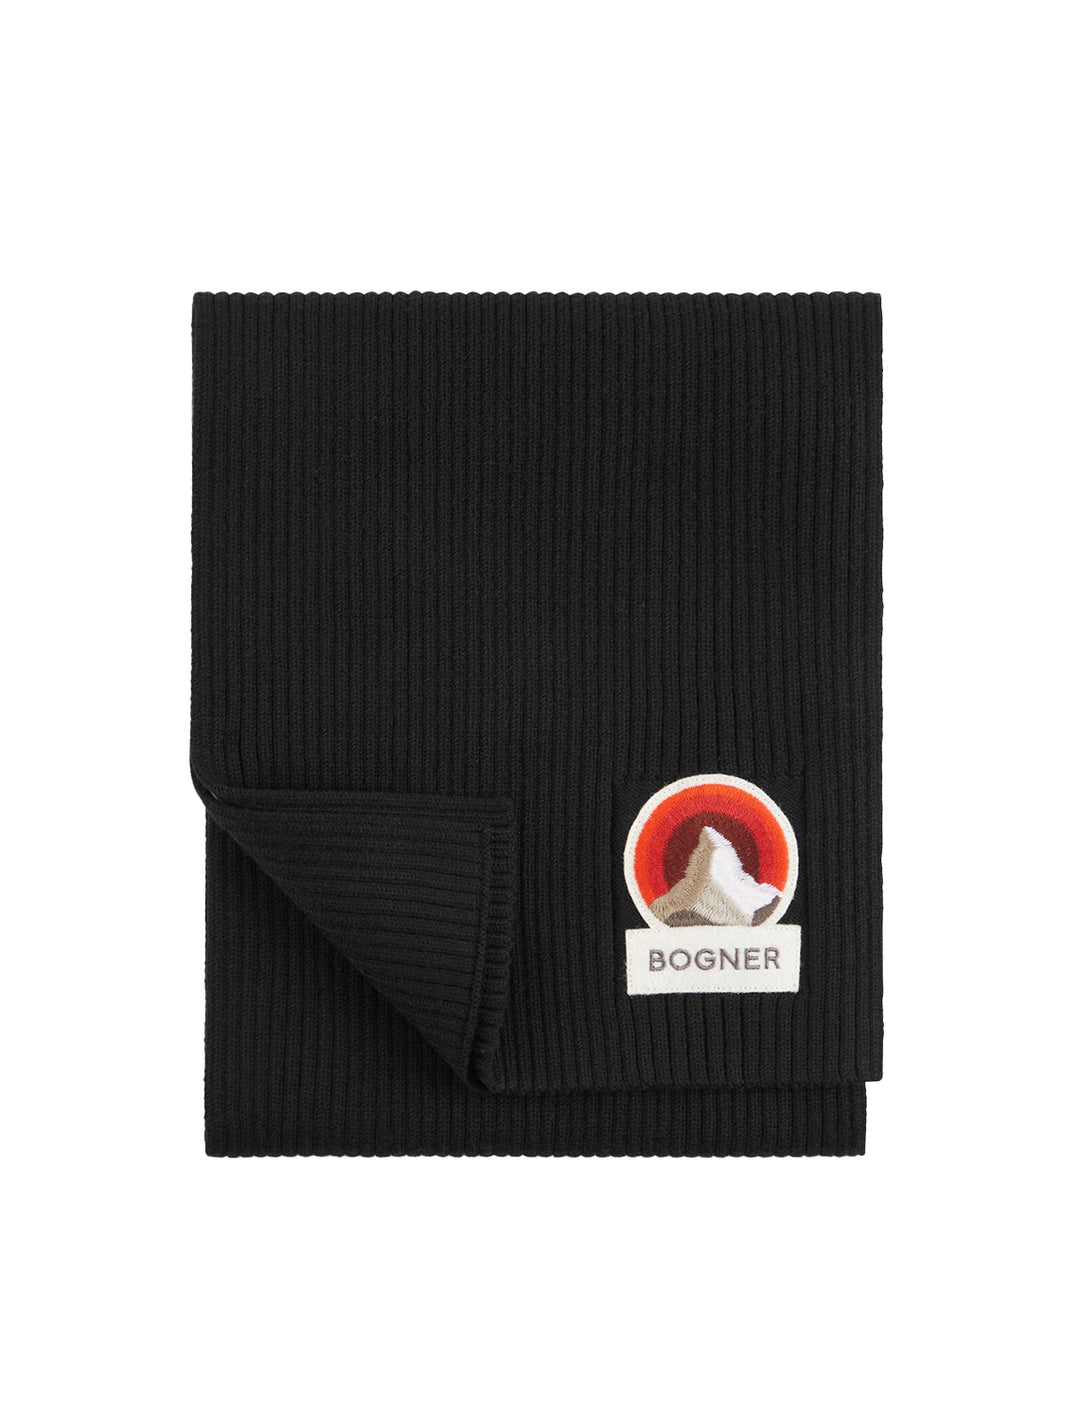 Front view of Bogner's bailee scarf in black.